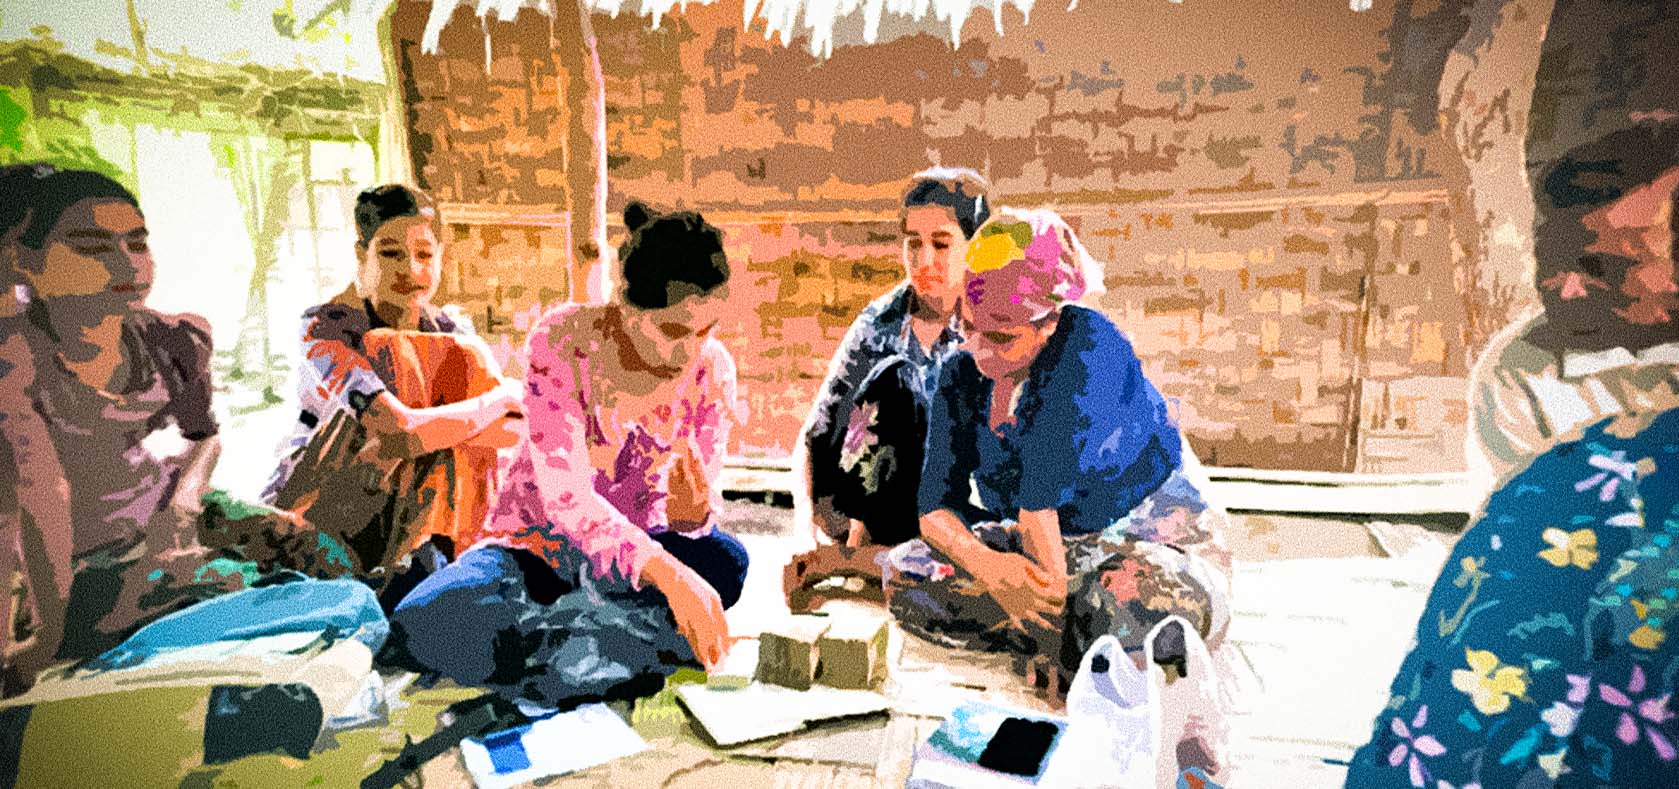 A group of women receives cash assistance for their animal husbandry collective from the CERF programme. Illustration based on a photo by UN Women.